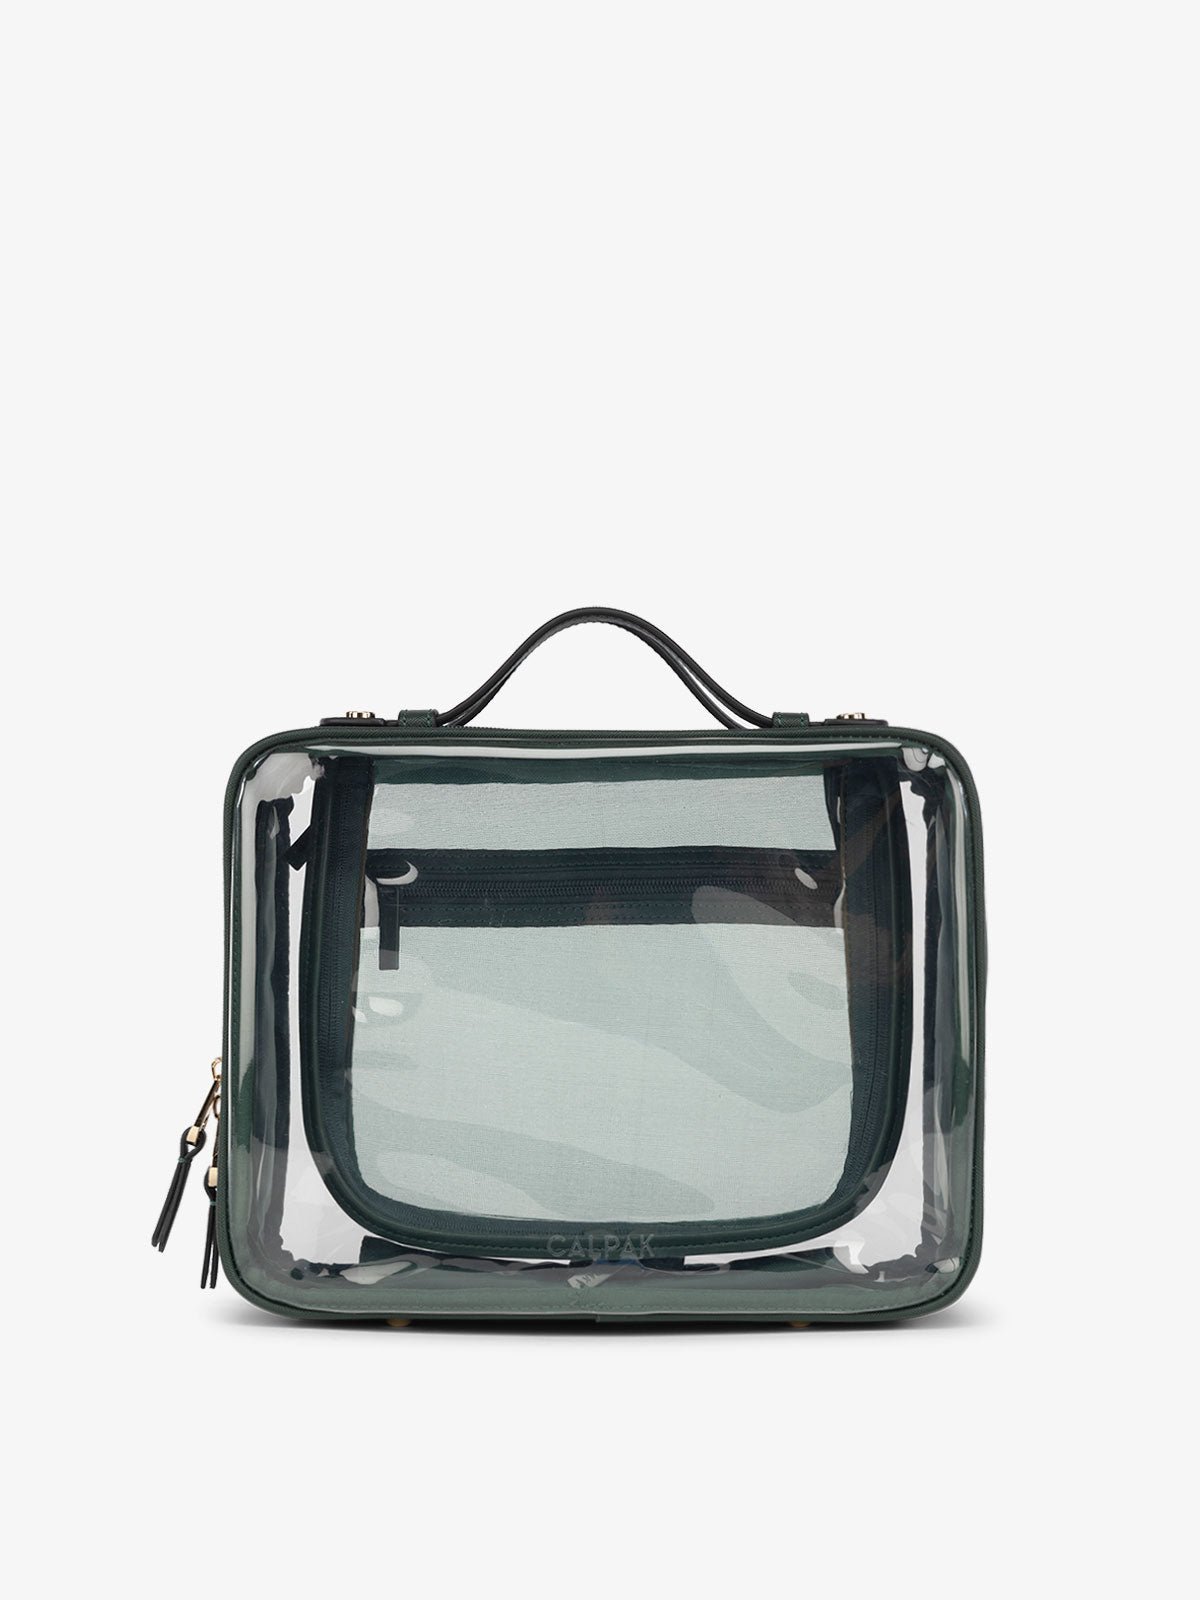 CALPAK Large clear makeup bag with dual handles and zippered compartments in green